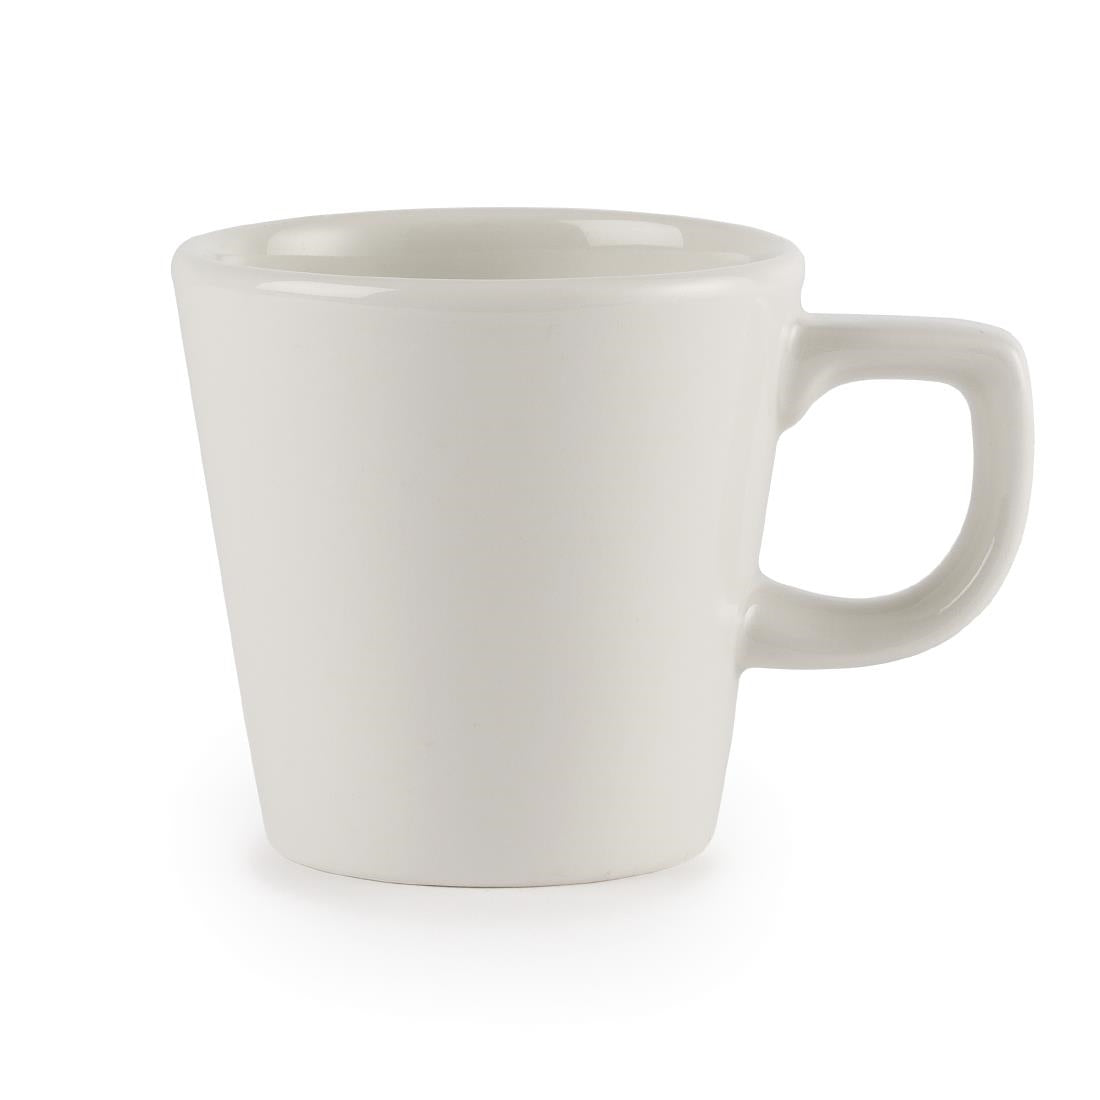 Churchill Plain Whiteware Cafe Cups 220ml (Pack of 24) JD Catering Equipment Solutions Ltd